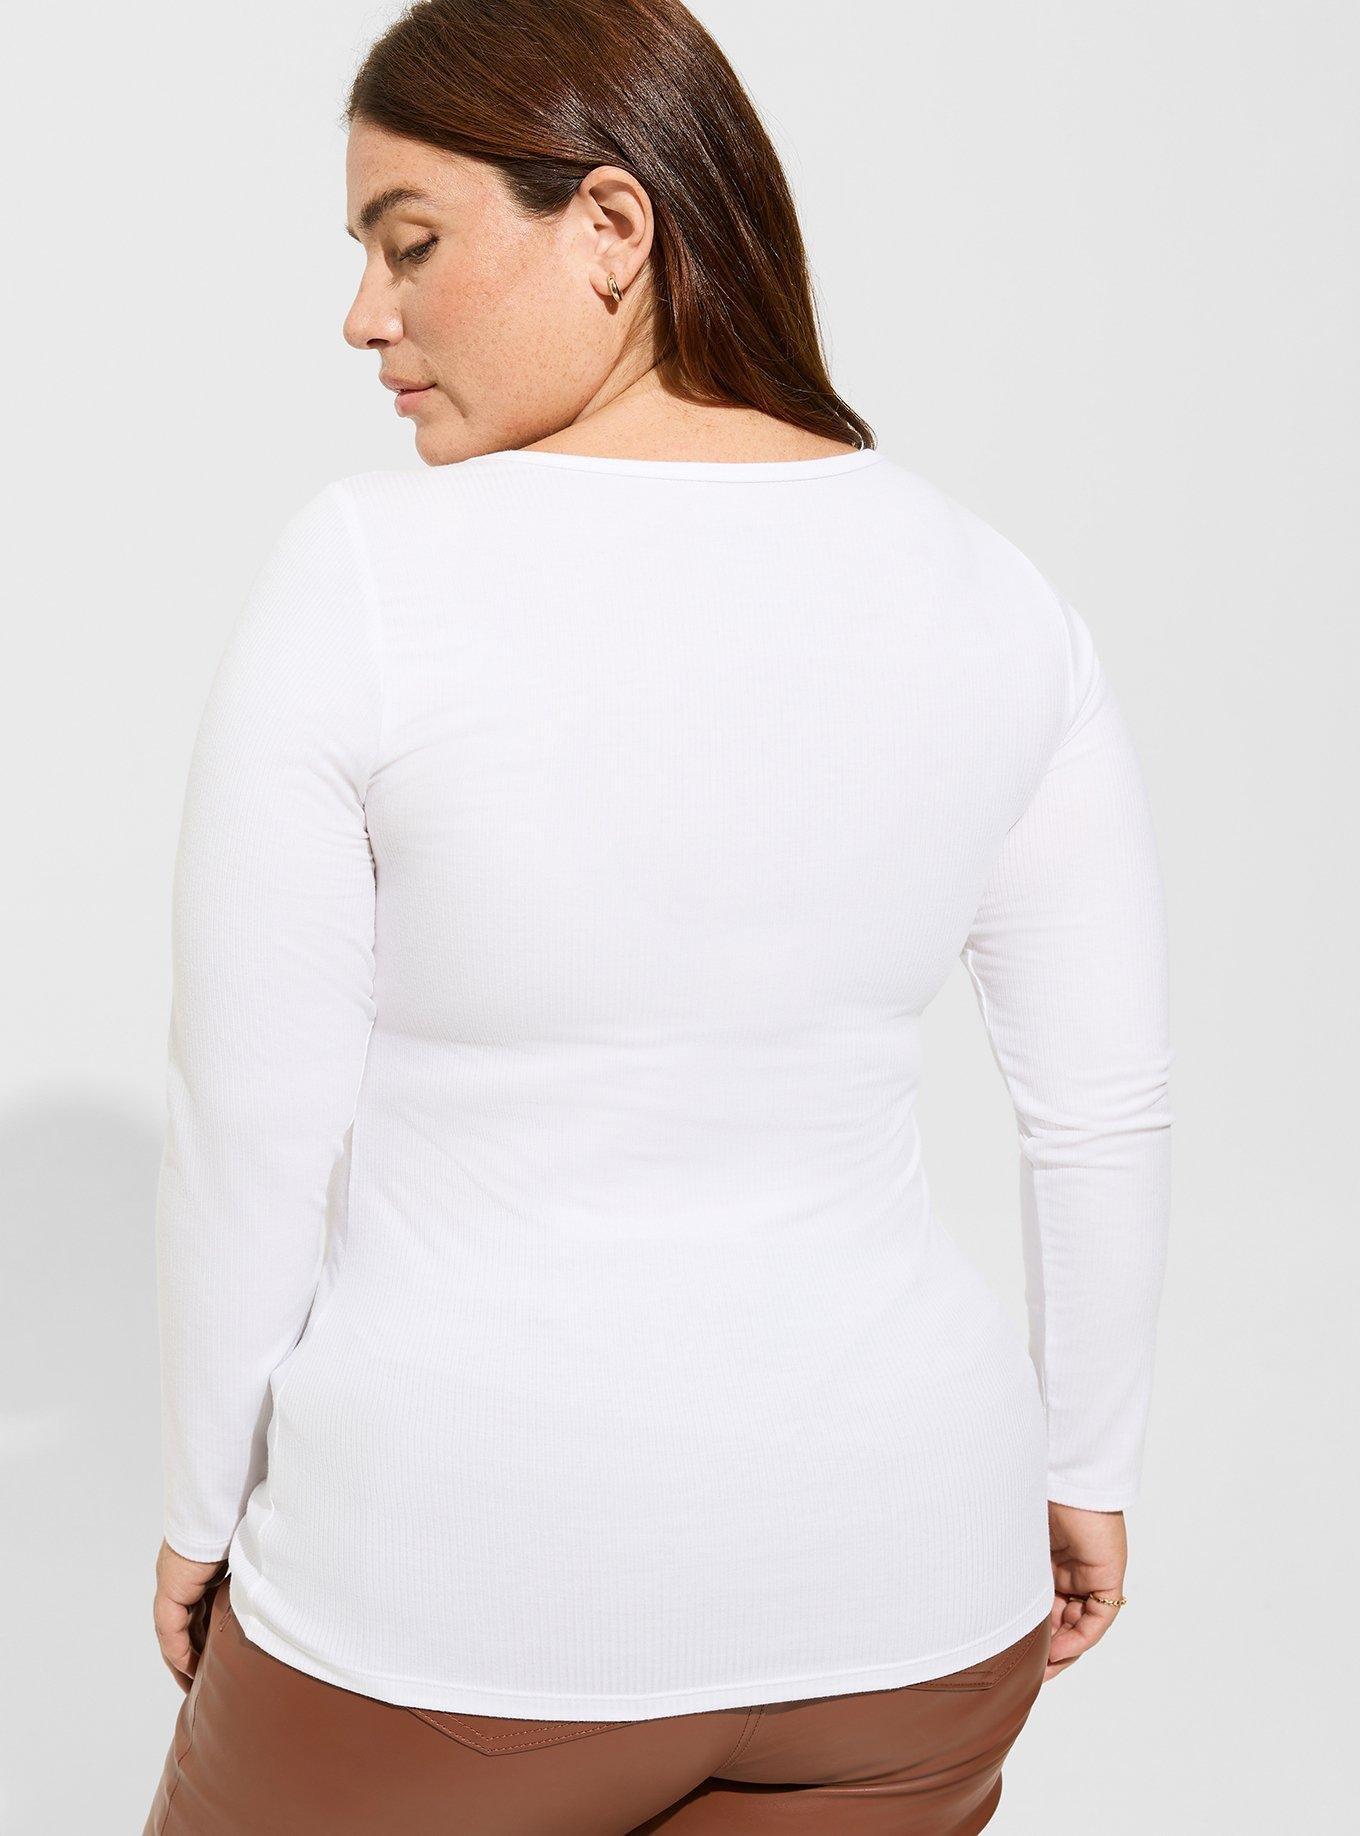 Plus Size - Super Soft Rib Scoop Neck Hook and Eye Long Sleeve Top